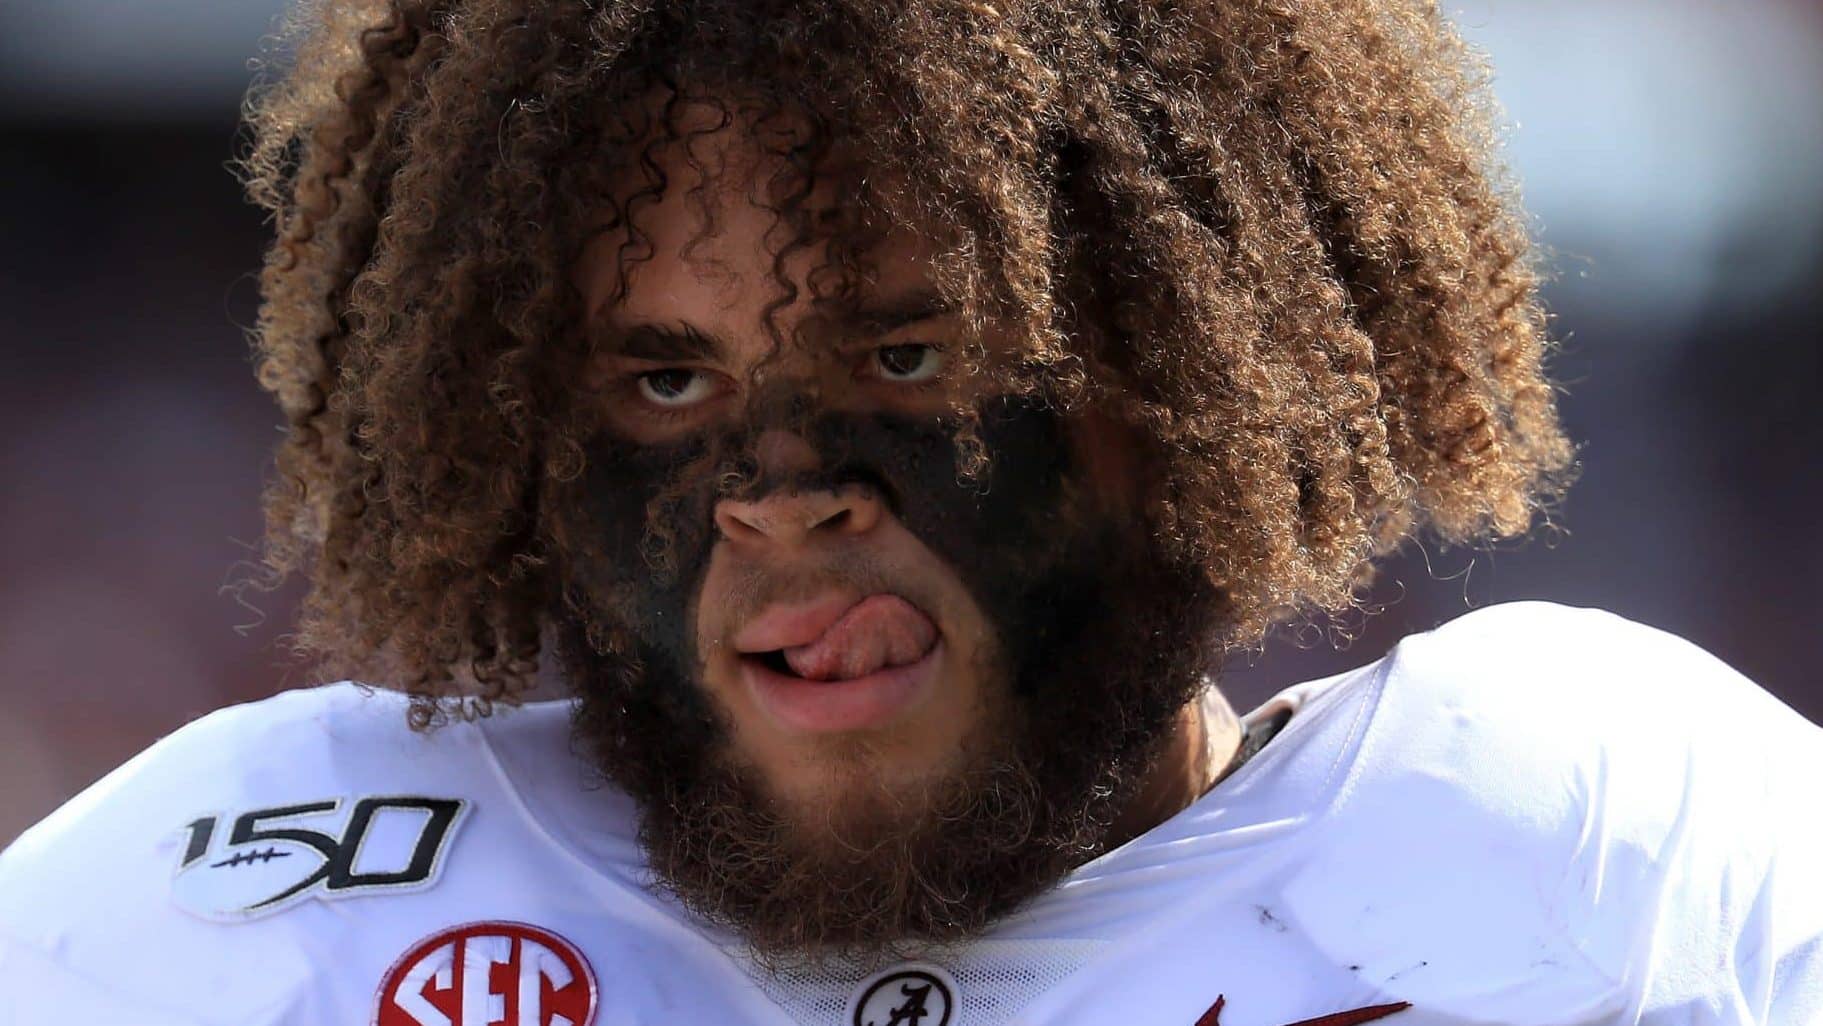 COLUMBIA, SOUTH CAROLINA - SEPTEMBER 14: Jedrick Wills Jr. #74 of the Alabama Crimson Tide watches on during their game against the South Carolina Gamecocks at Williams-Brice Stadium on September 14, 2019 in Columbia, South Carolina.